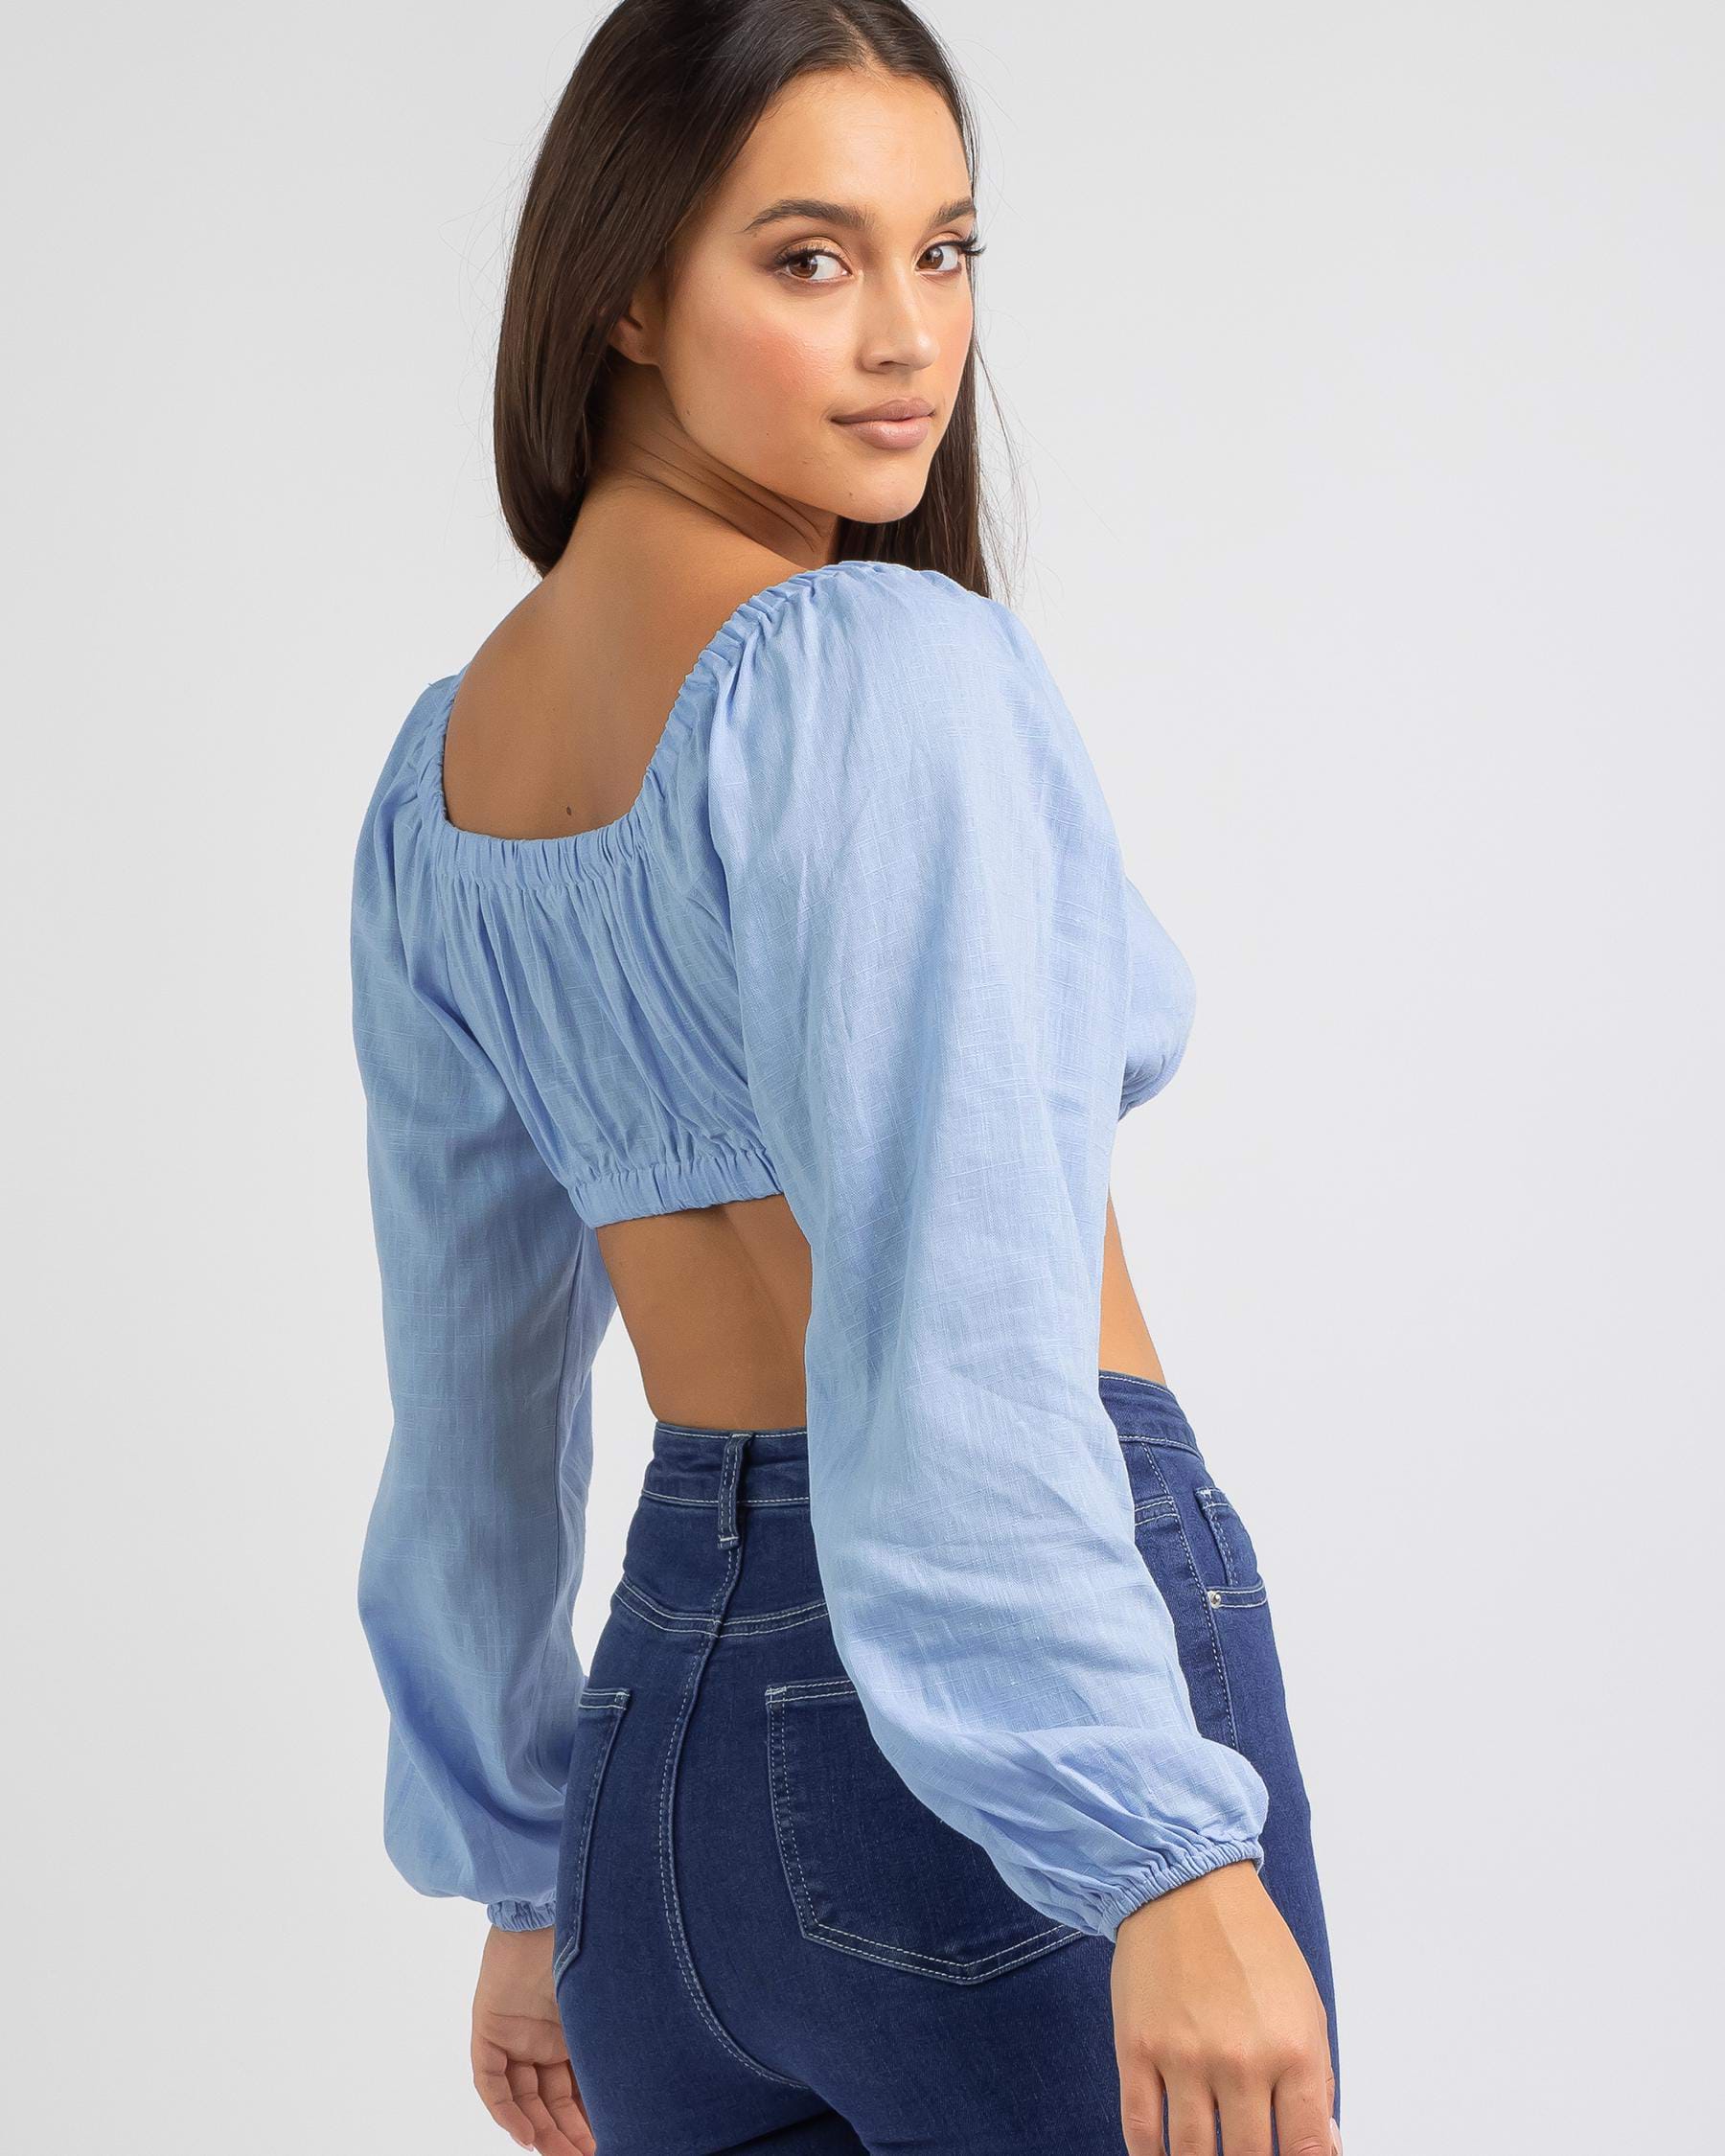 Shop Ava And Ever Indigo Top In Light Blue - Fast Shipping & Easy ...